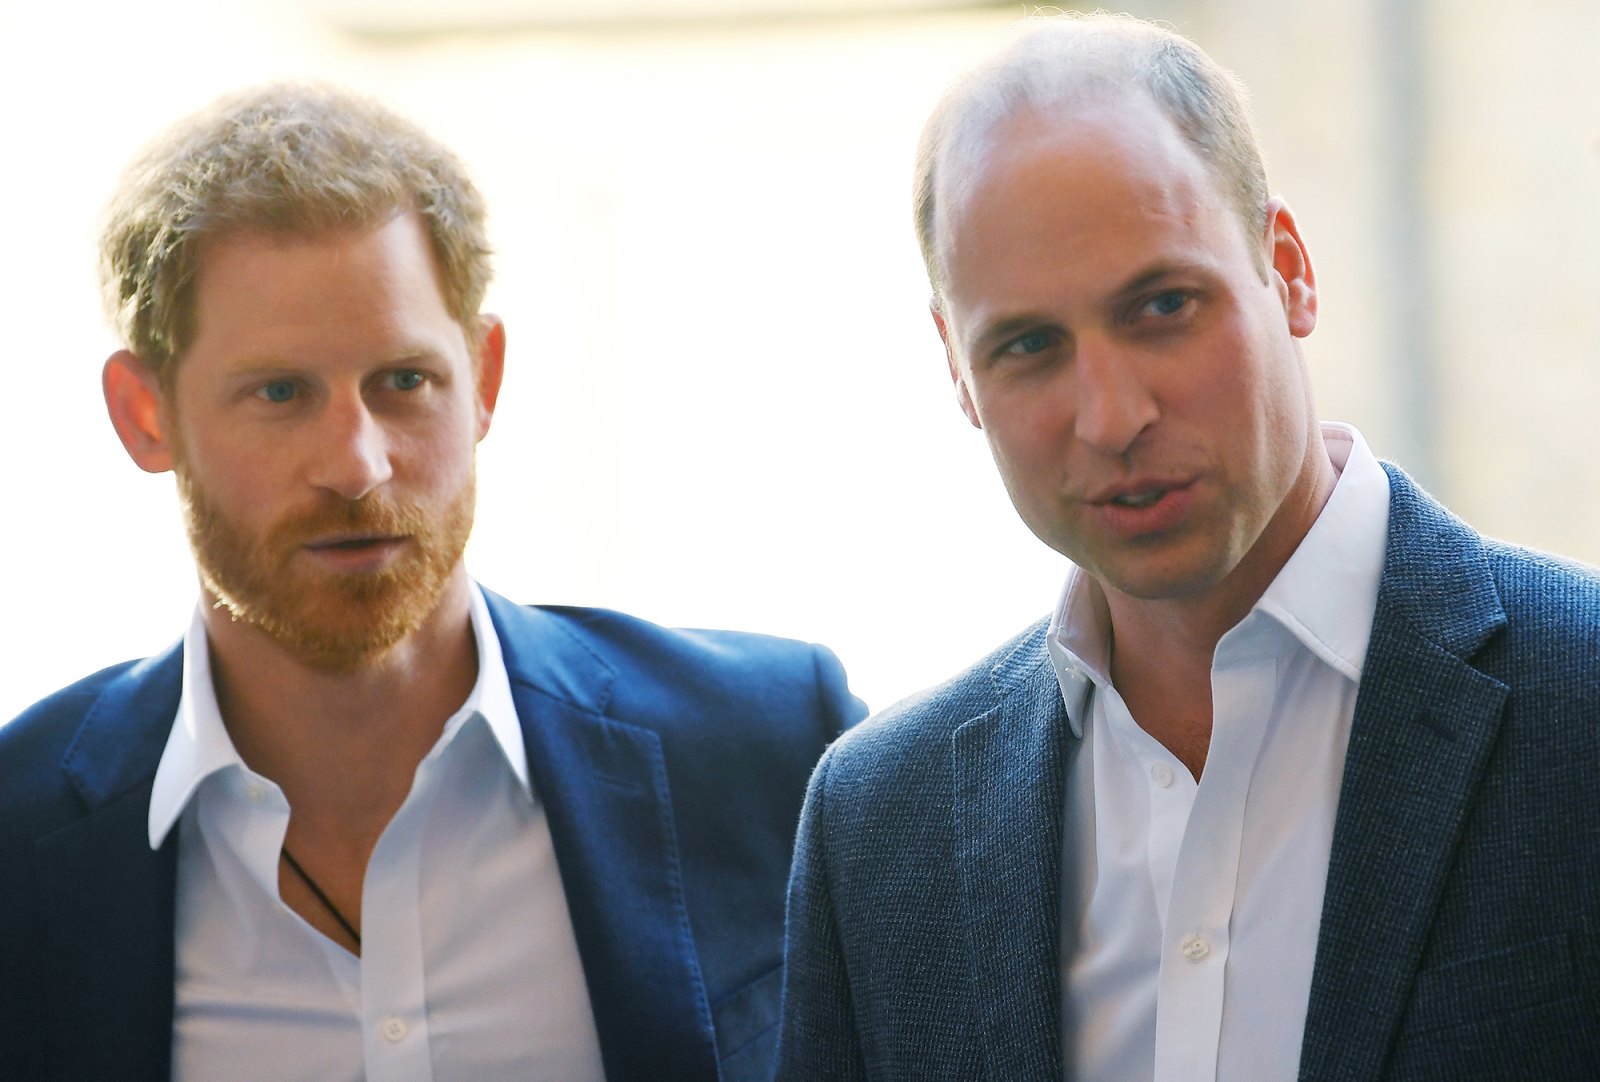 Inside Prince William and Prince Harry Relationship Over the Years